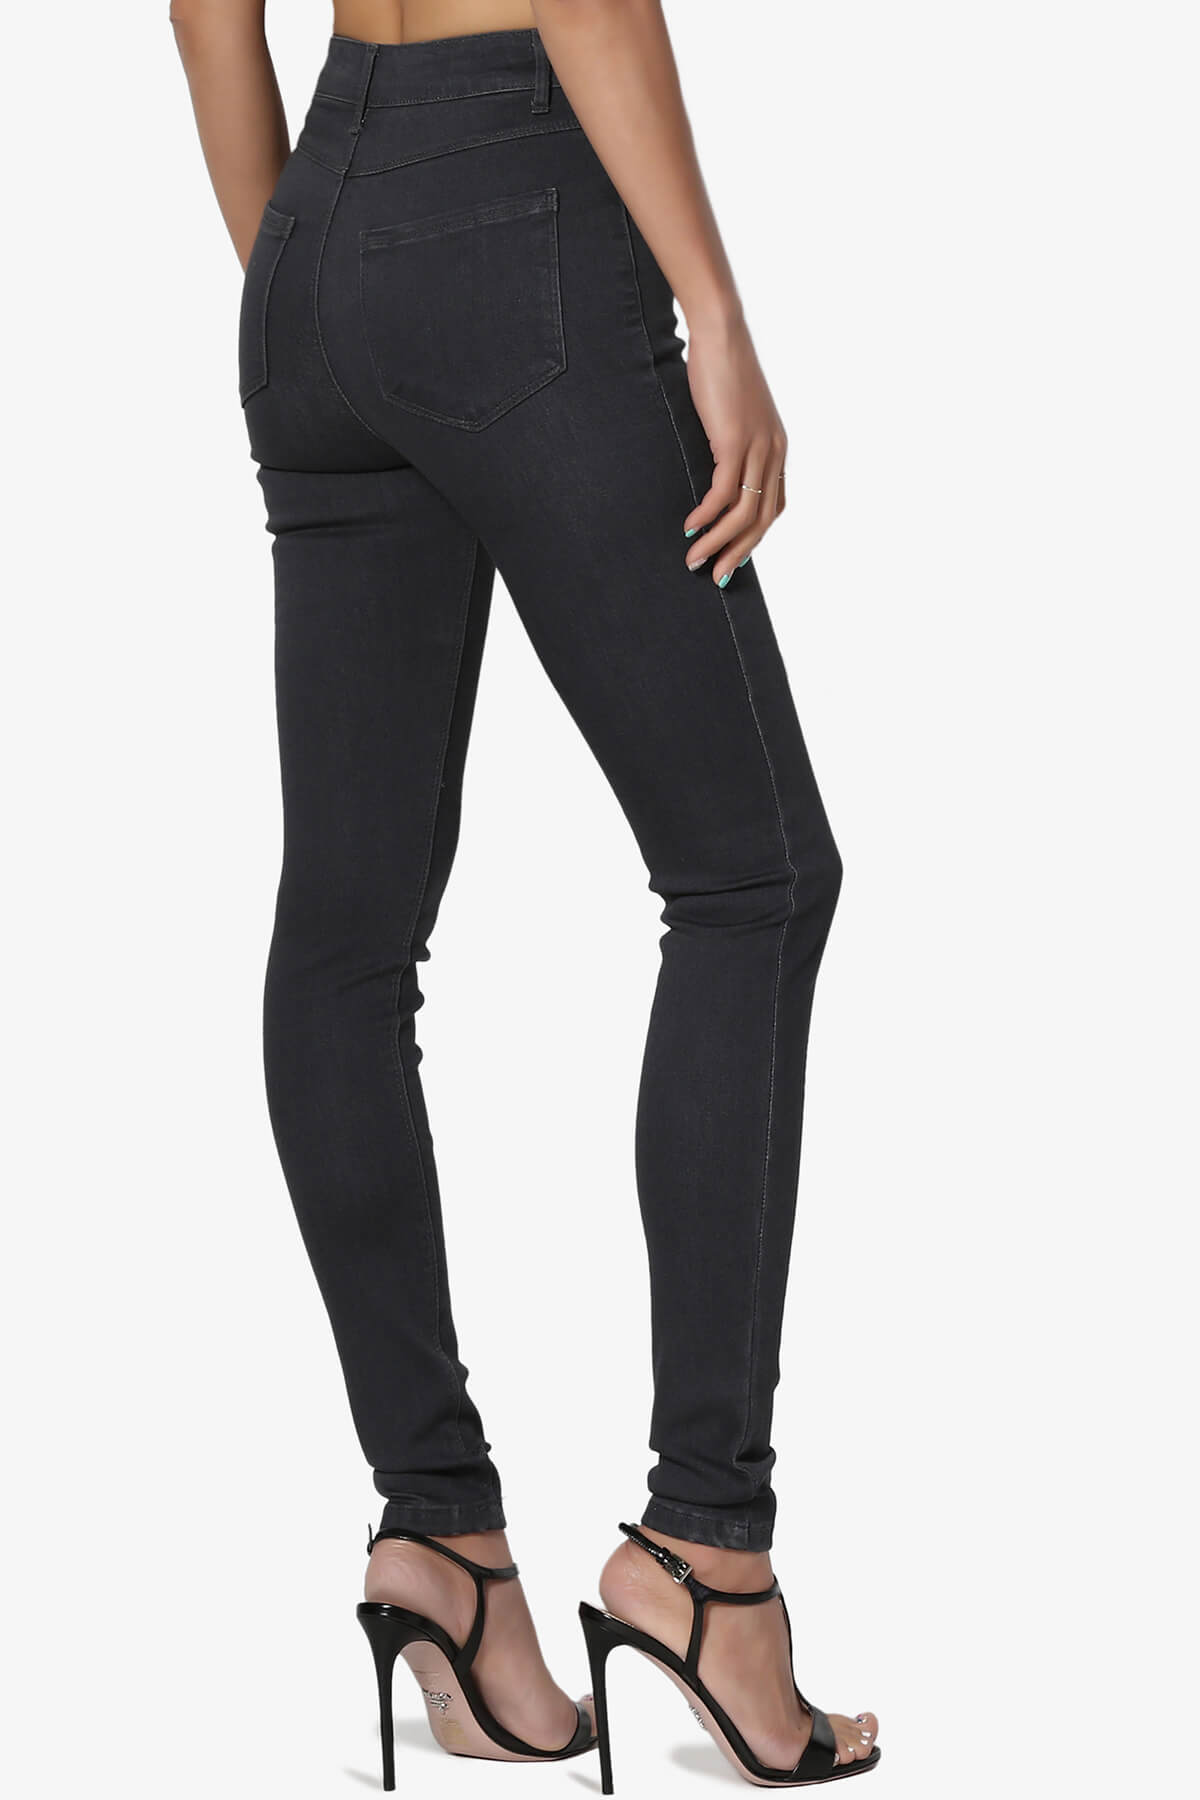 Women's Must-Have Colored High Rise Ankle Skinny Jeans Stretch Denim Jeggings - image 4 of 7